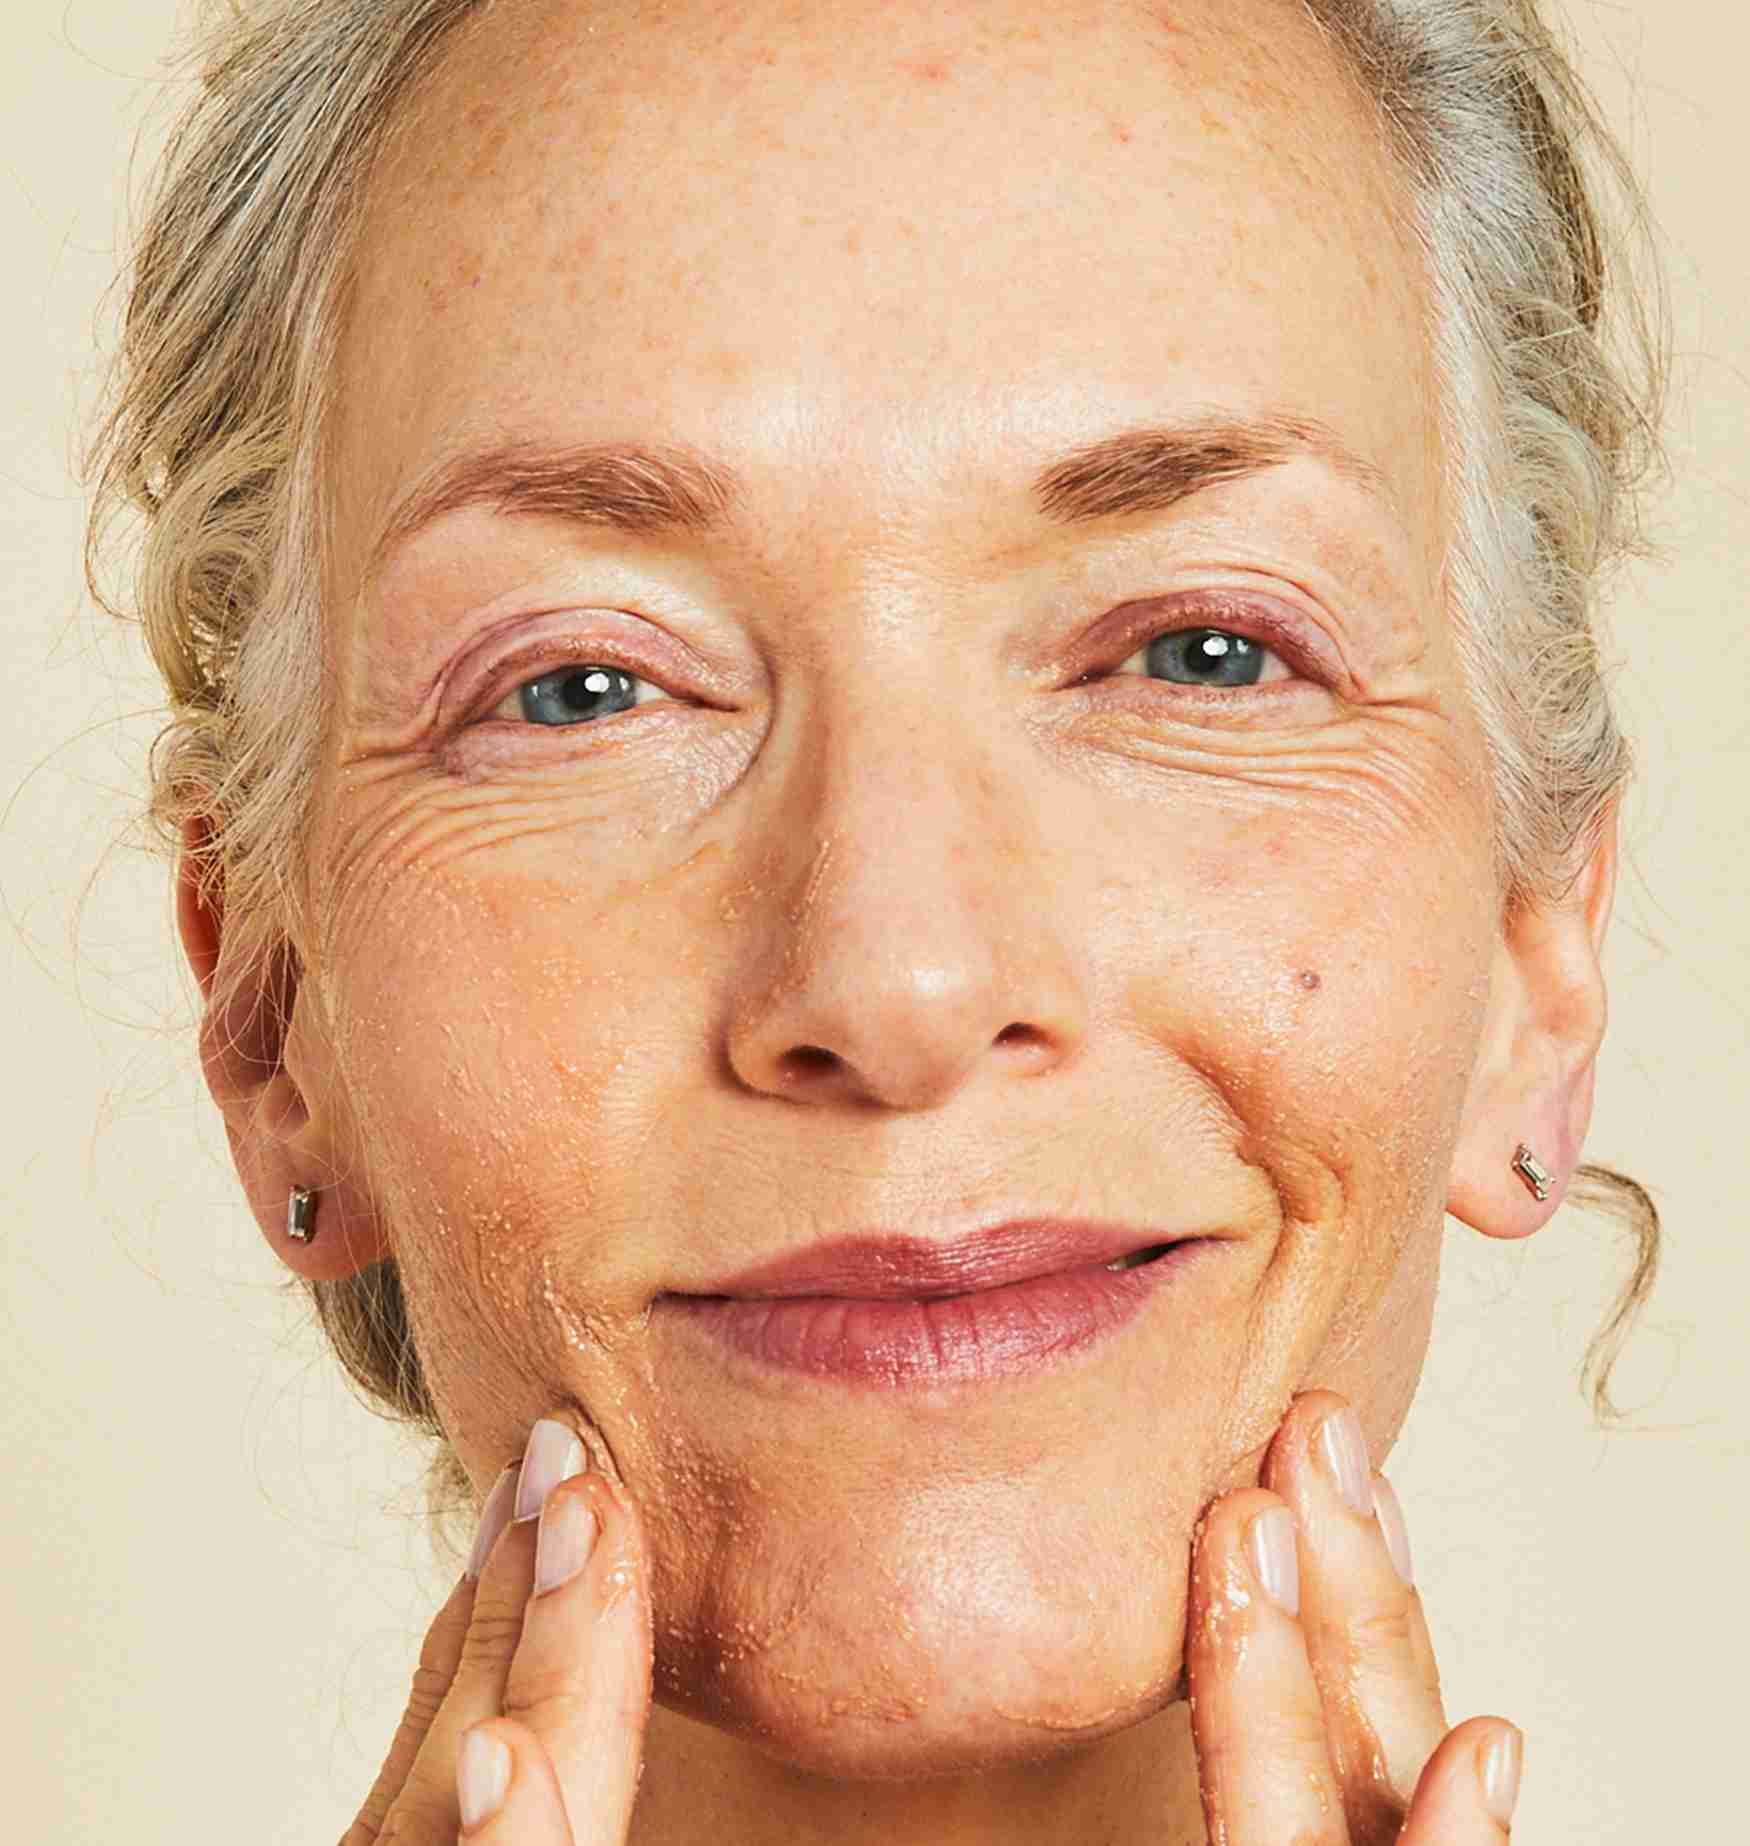 Taking good care of your skin is so important as you age.